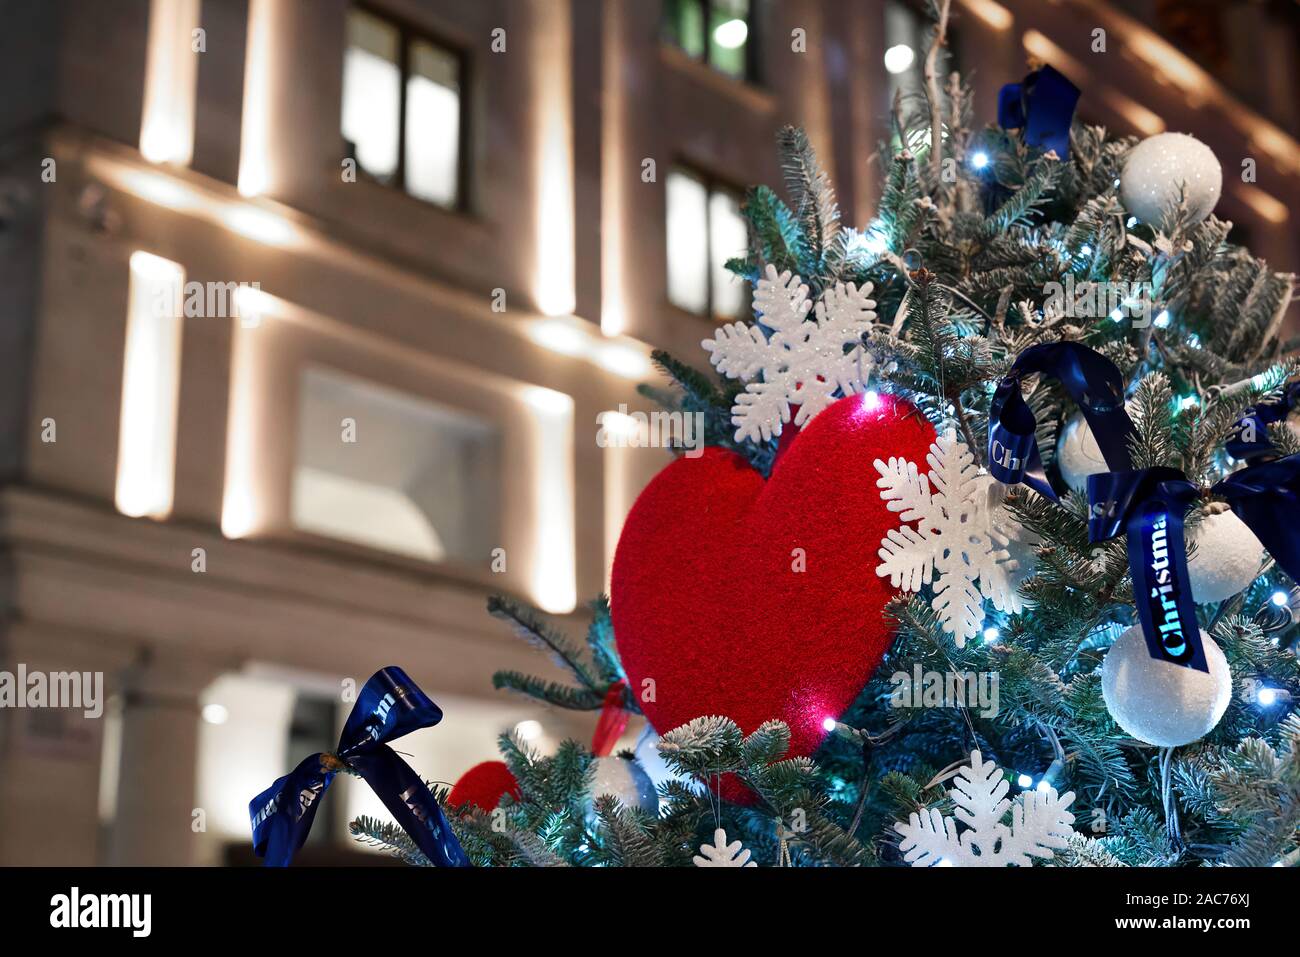 A Christmas tree decorated with a red heart, blue ribbons, snowflakes and white balls Stock Photo